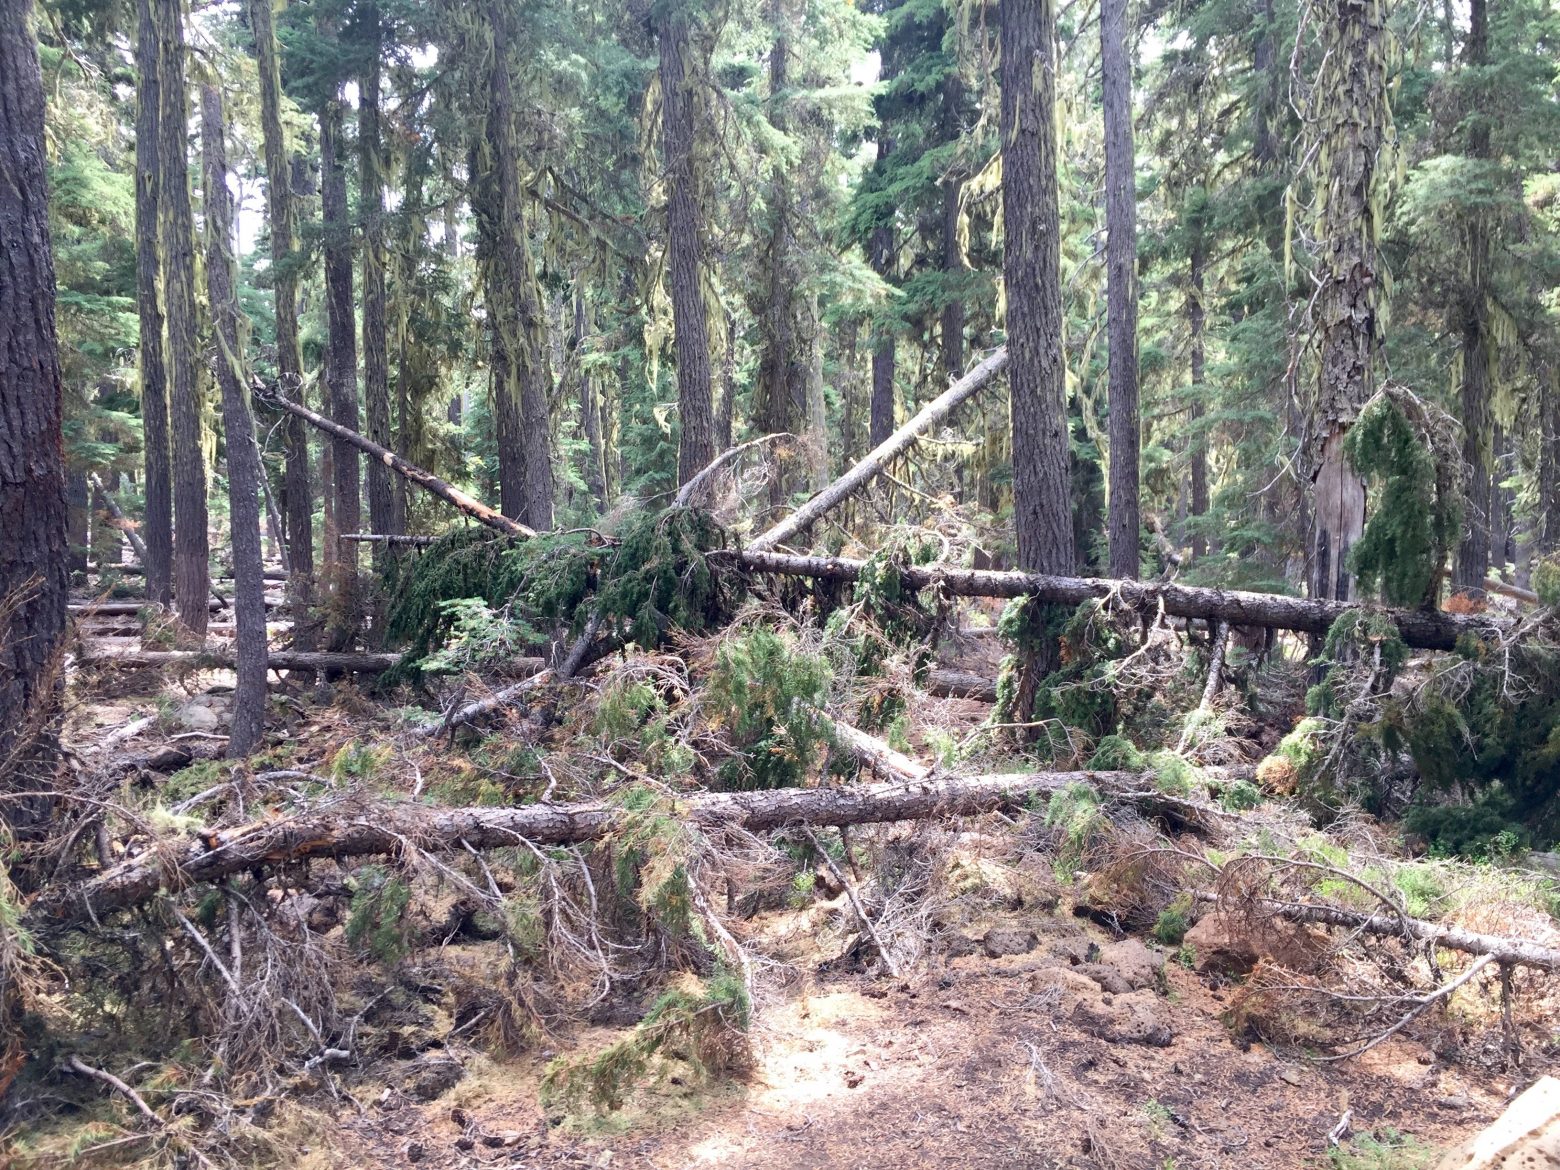 Downed trees completely blocking the PCT